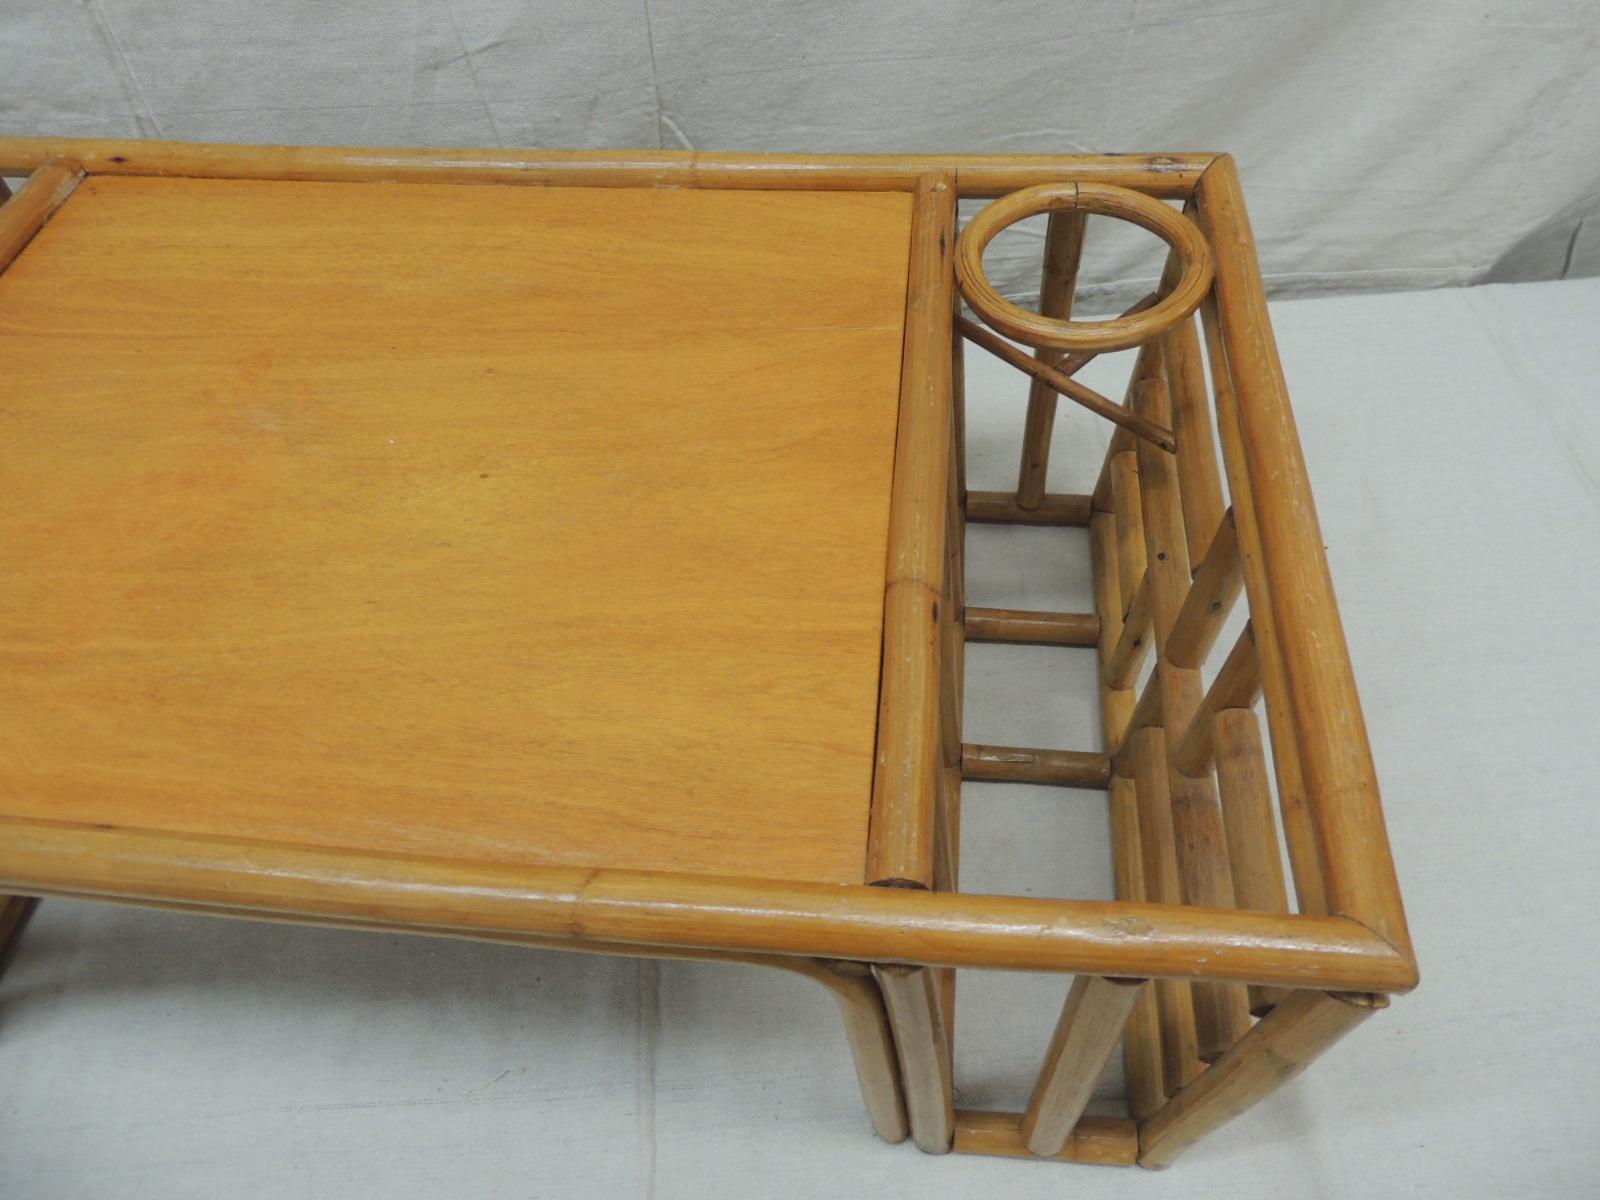 Vintage bamboo bed serving tray
Wood top and dividers. Meandering border side panels
Size: 28 W x 15 D x 9.75 H.
 